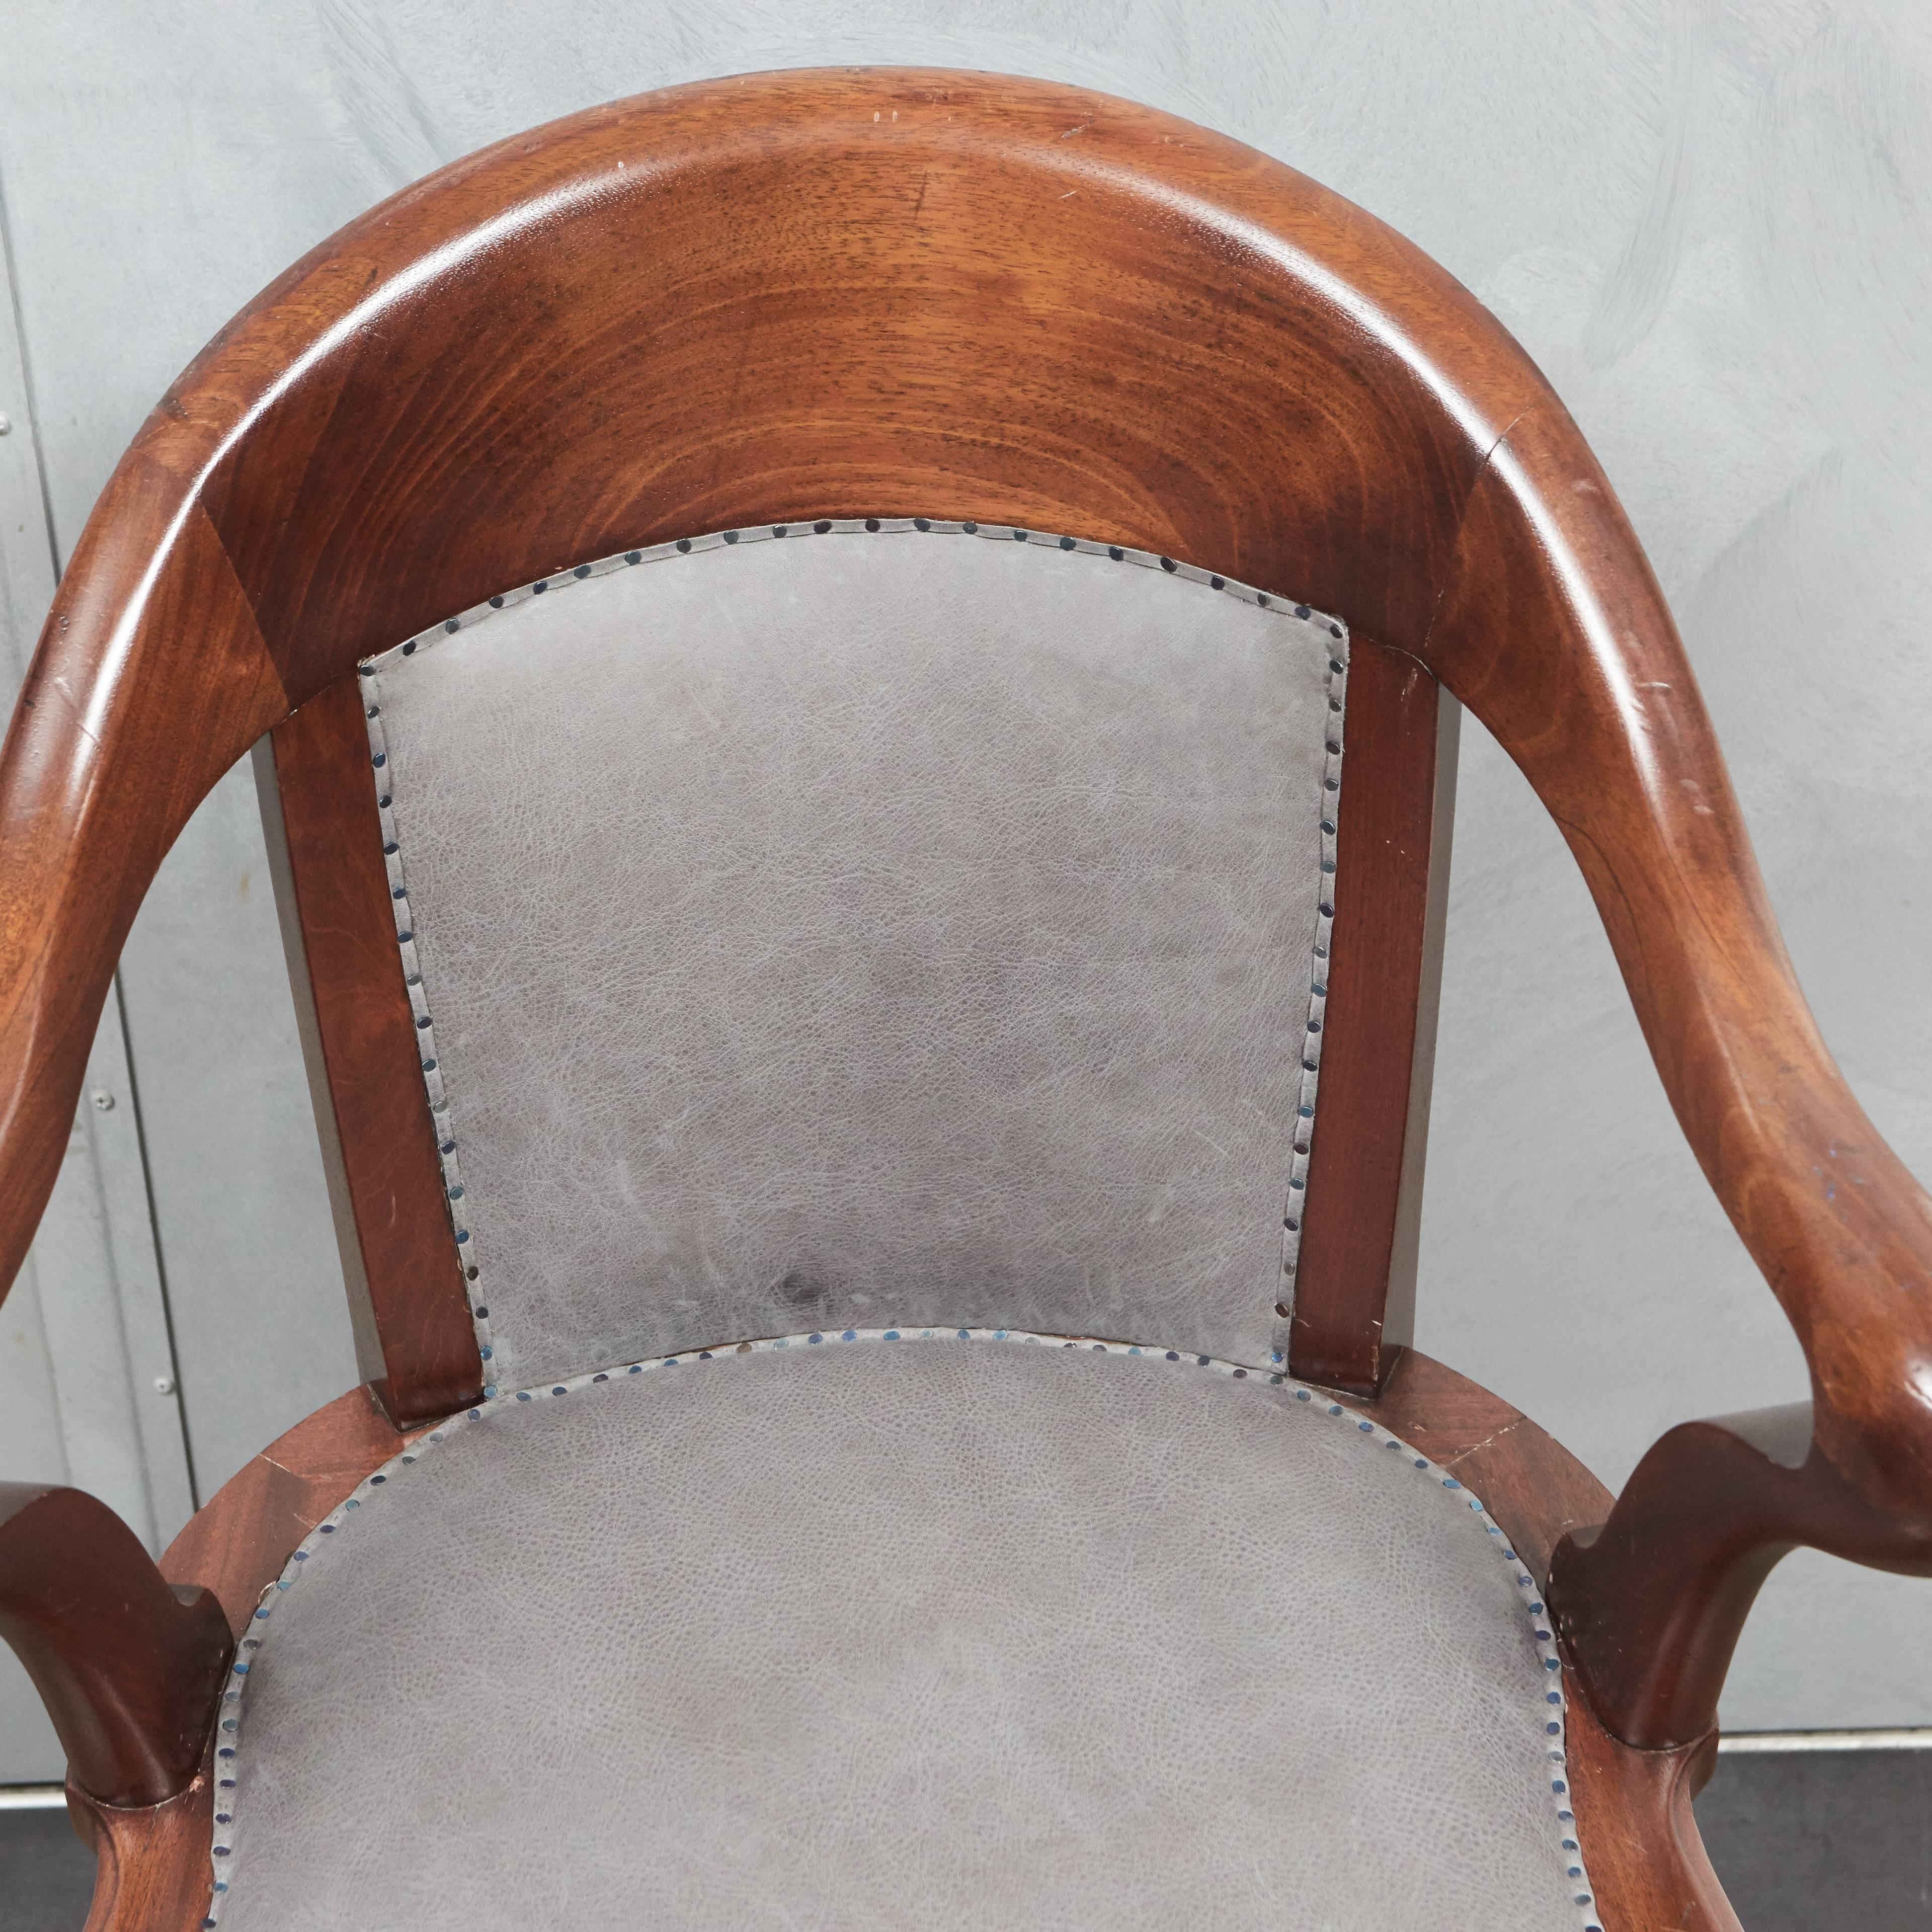 This early 20th century office chair with beautifully shaped back and arms is a great piece with some very special touches. The seat and back have been newly upholstered with soft grey leather using small nailheads that have a blue sheen. The chair